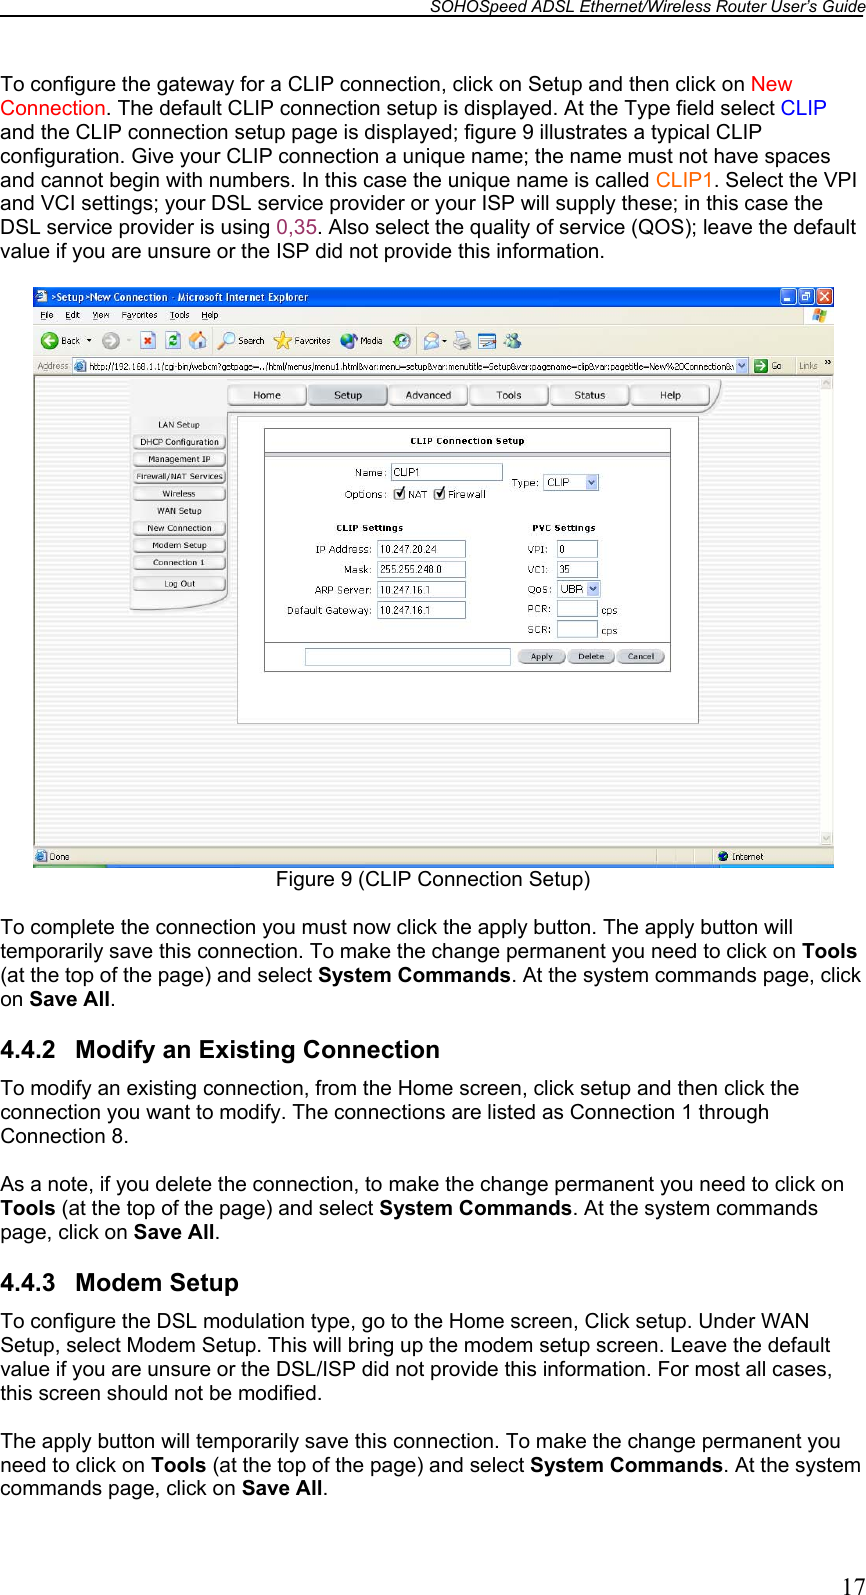 SOHOSpeed ADSL Ethernet/Wireless Router User’s Guide   17 To configure the gateway for a CLIP connection, click on Setup and then click on New Connection. The default CLIP connection setup is displayed. At the Type field select CLIP and the CLIP connection setup page is displayed; figure 9 illustrates a typical CLIP configuration. Give your CLIP connection a unique name; the name must not have spaces and cannot begin with numbers. In this case the unique name is called CLIP1. Select the VPI and VCI settings; your DSL service provider or your ISP will supply these; in this case the DSL service provider is using 0,35. Also select the quality of service (QOS); leave the default value if you are unsure or the ISP did not provide this information.   Figure 9 (CLIP Connection Setup)  To complete the connection you must now click the apply button. The apply button will temporarily save this connection. To make the change permanent you need to click on Tools (at the top of the page) and select System Commands. At the system commands page, click on Save All.  4.4.2  Modify an Existing Connection To modify an existing connection, from the Home screen, click setup and then click the connection you want to modify. The connections are listed as Connection 1 through Connection 8.  As a note, if you delete the connection, to make the change permanent you need to click on Tools (at the top of the page) and select System Commands. At the system commands page, click on Save All.  4.4.3 Modem Setup To configure the DSL modulation type, go to the Home screen, Click setup. Under WAN Setup, select Modem Setup. This will bring up the modem setup screen. Leave the default value if you are unsure or the DSL/ISP did not provide this information. For most all cases, this screen should not be modified.  The apply button will temporarily save this connection. To make the change permanent you need to click on Tools (at the top of the page) and select System Commands. At the system commands page, click on Save All. 